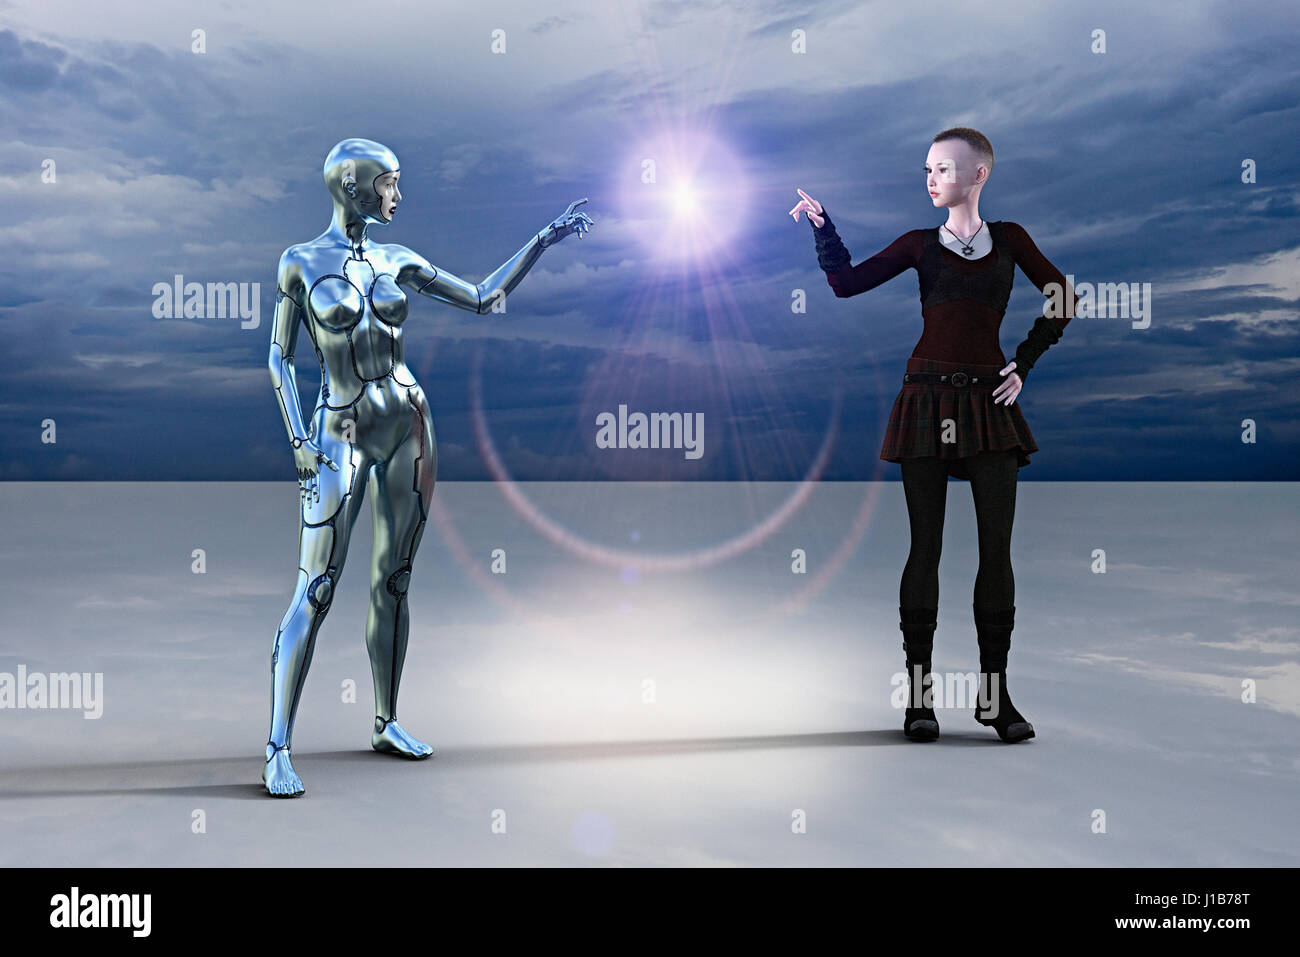 Silver female cyborg and woman pointing at glowing light Stock Photo